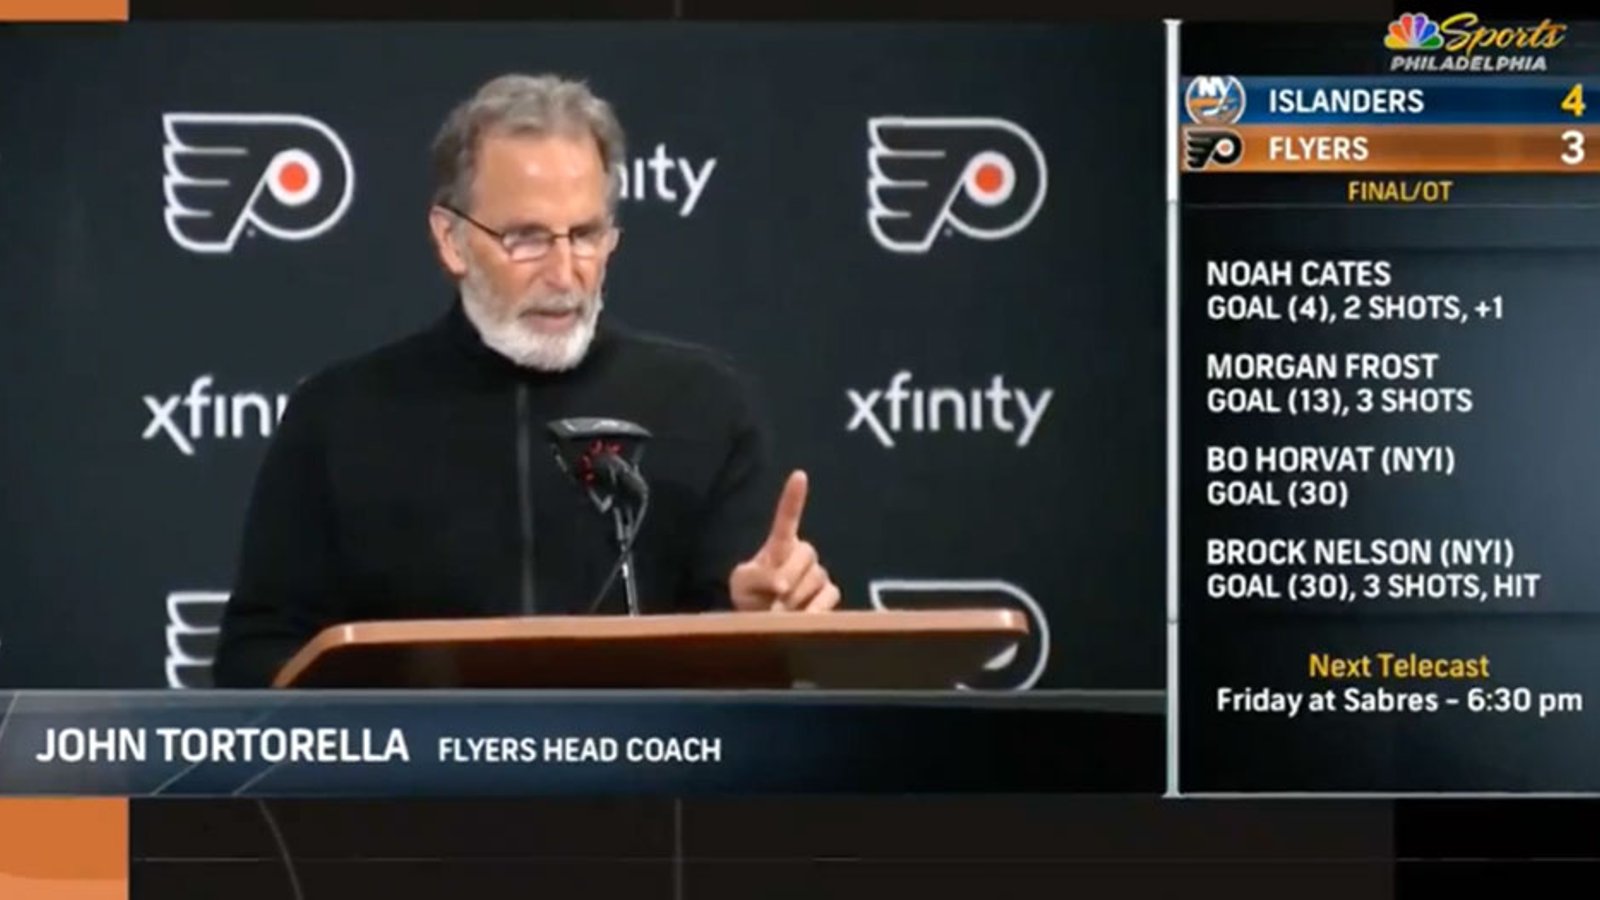 Tortorella comes out swinging in his post-game press conference